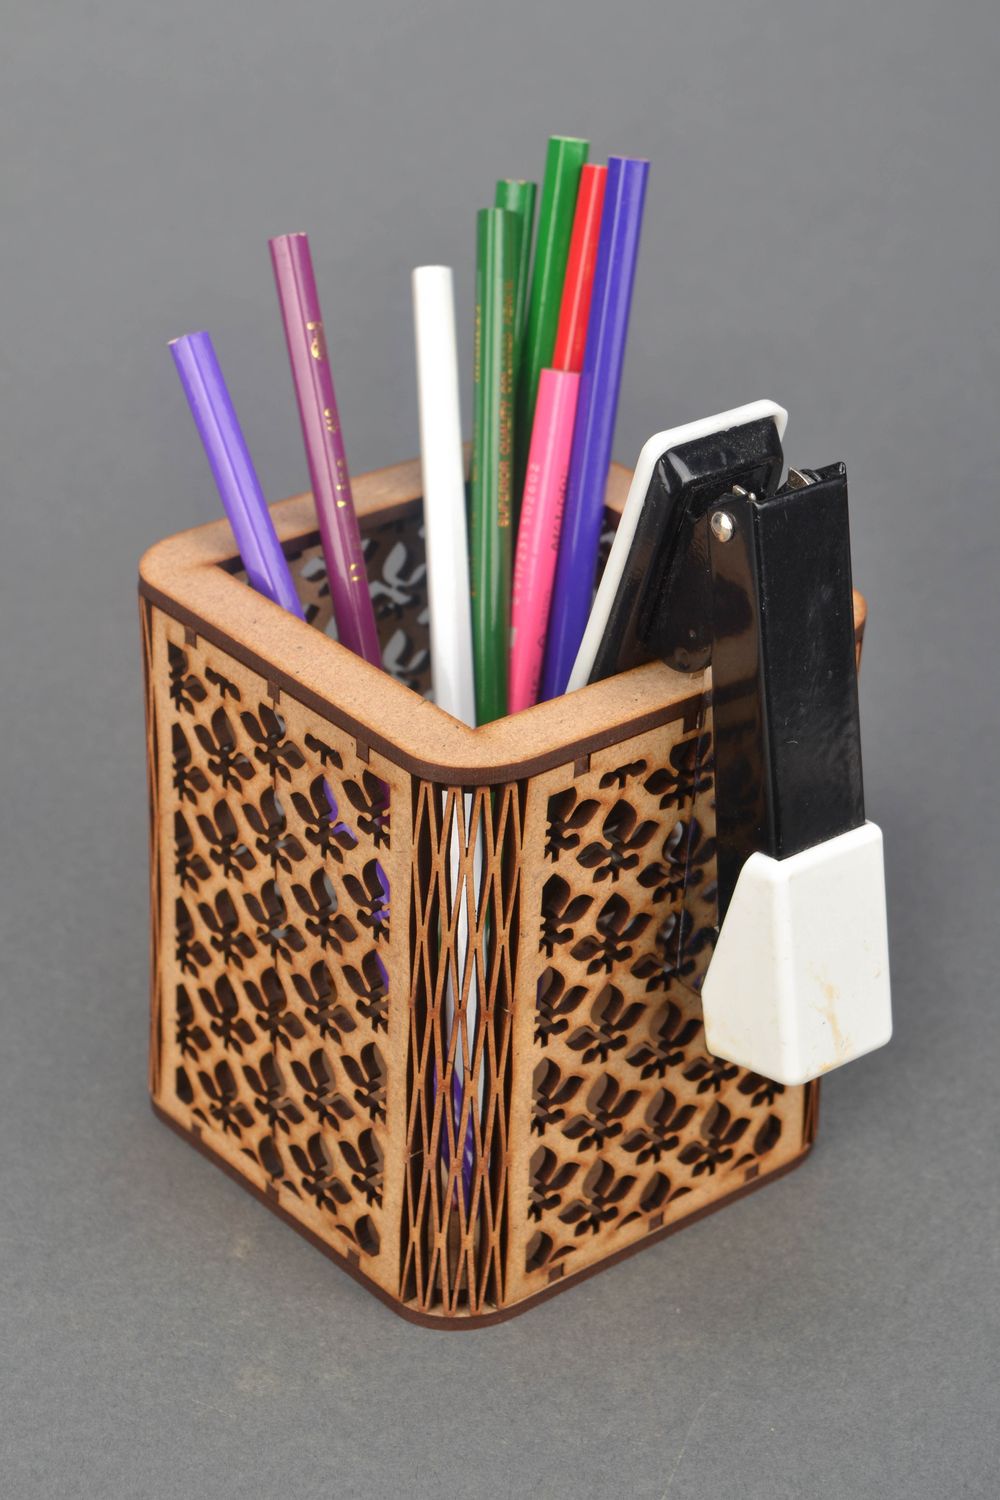 Plywood craft blank for pen holder photo 1